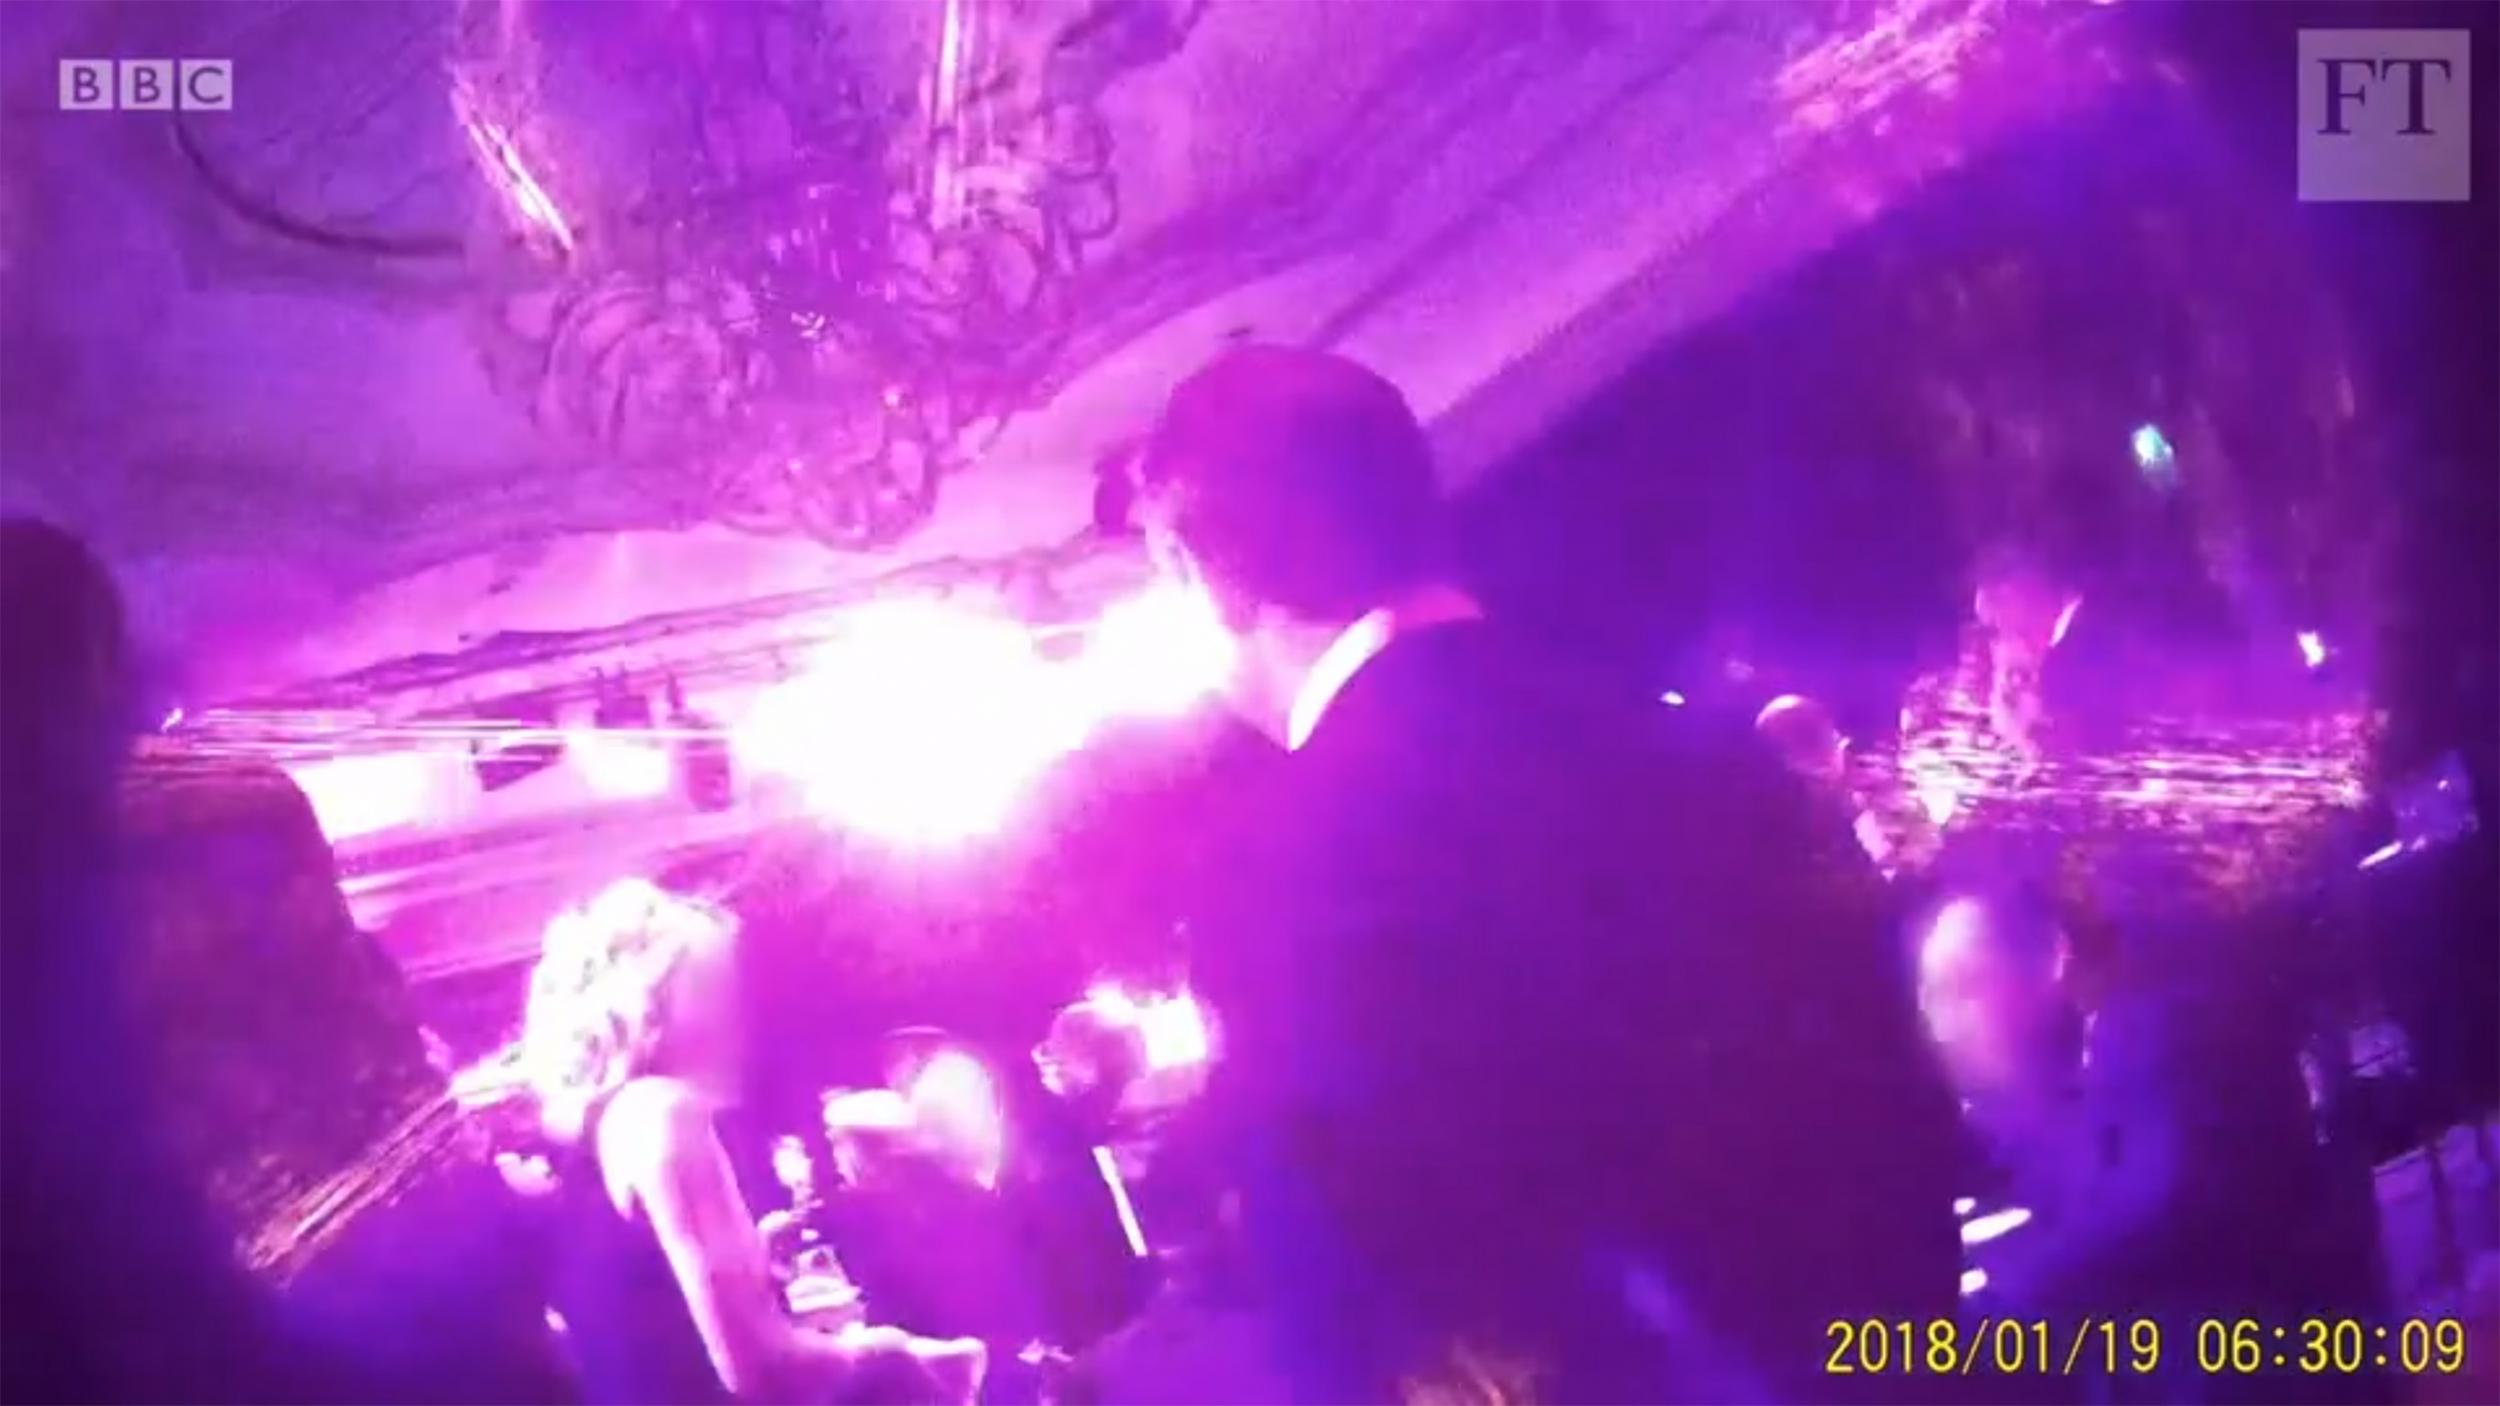 A grab from footage at the Presidents club charity fundraiser